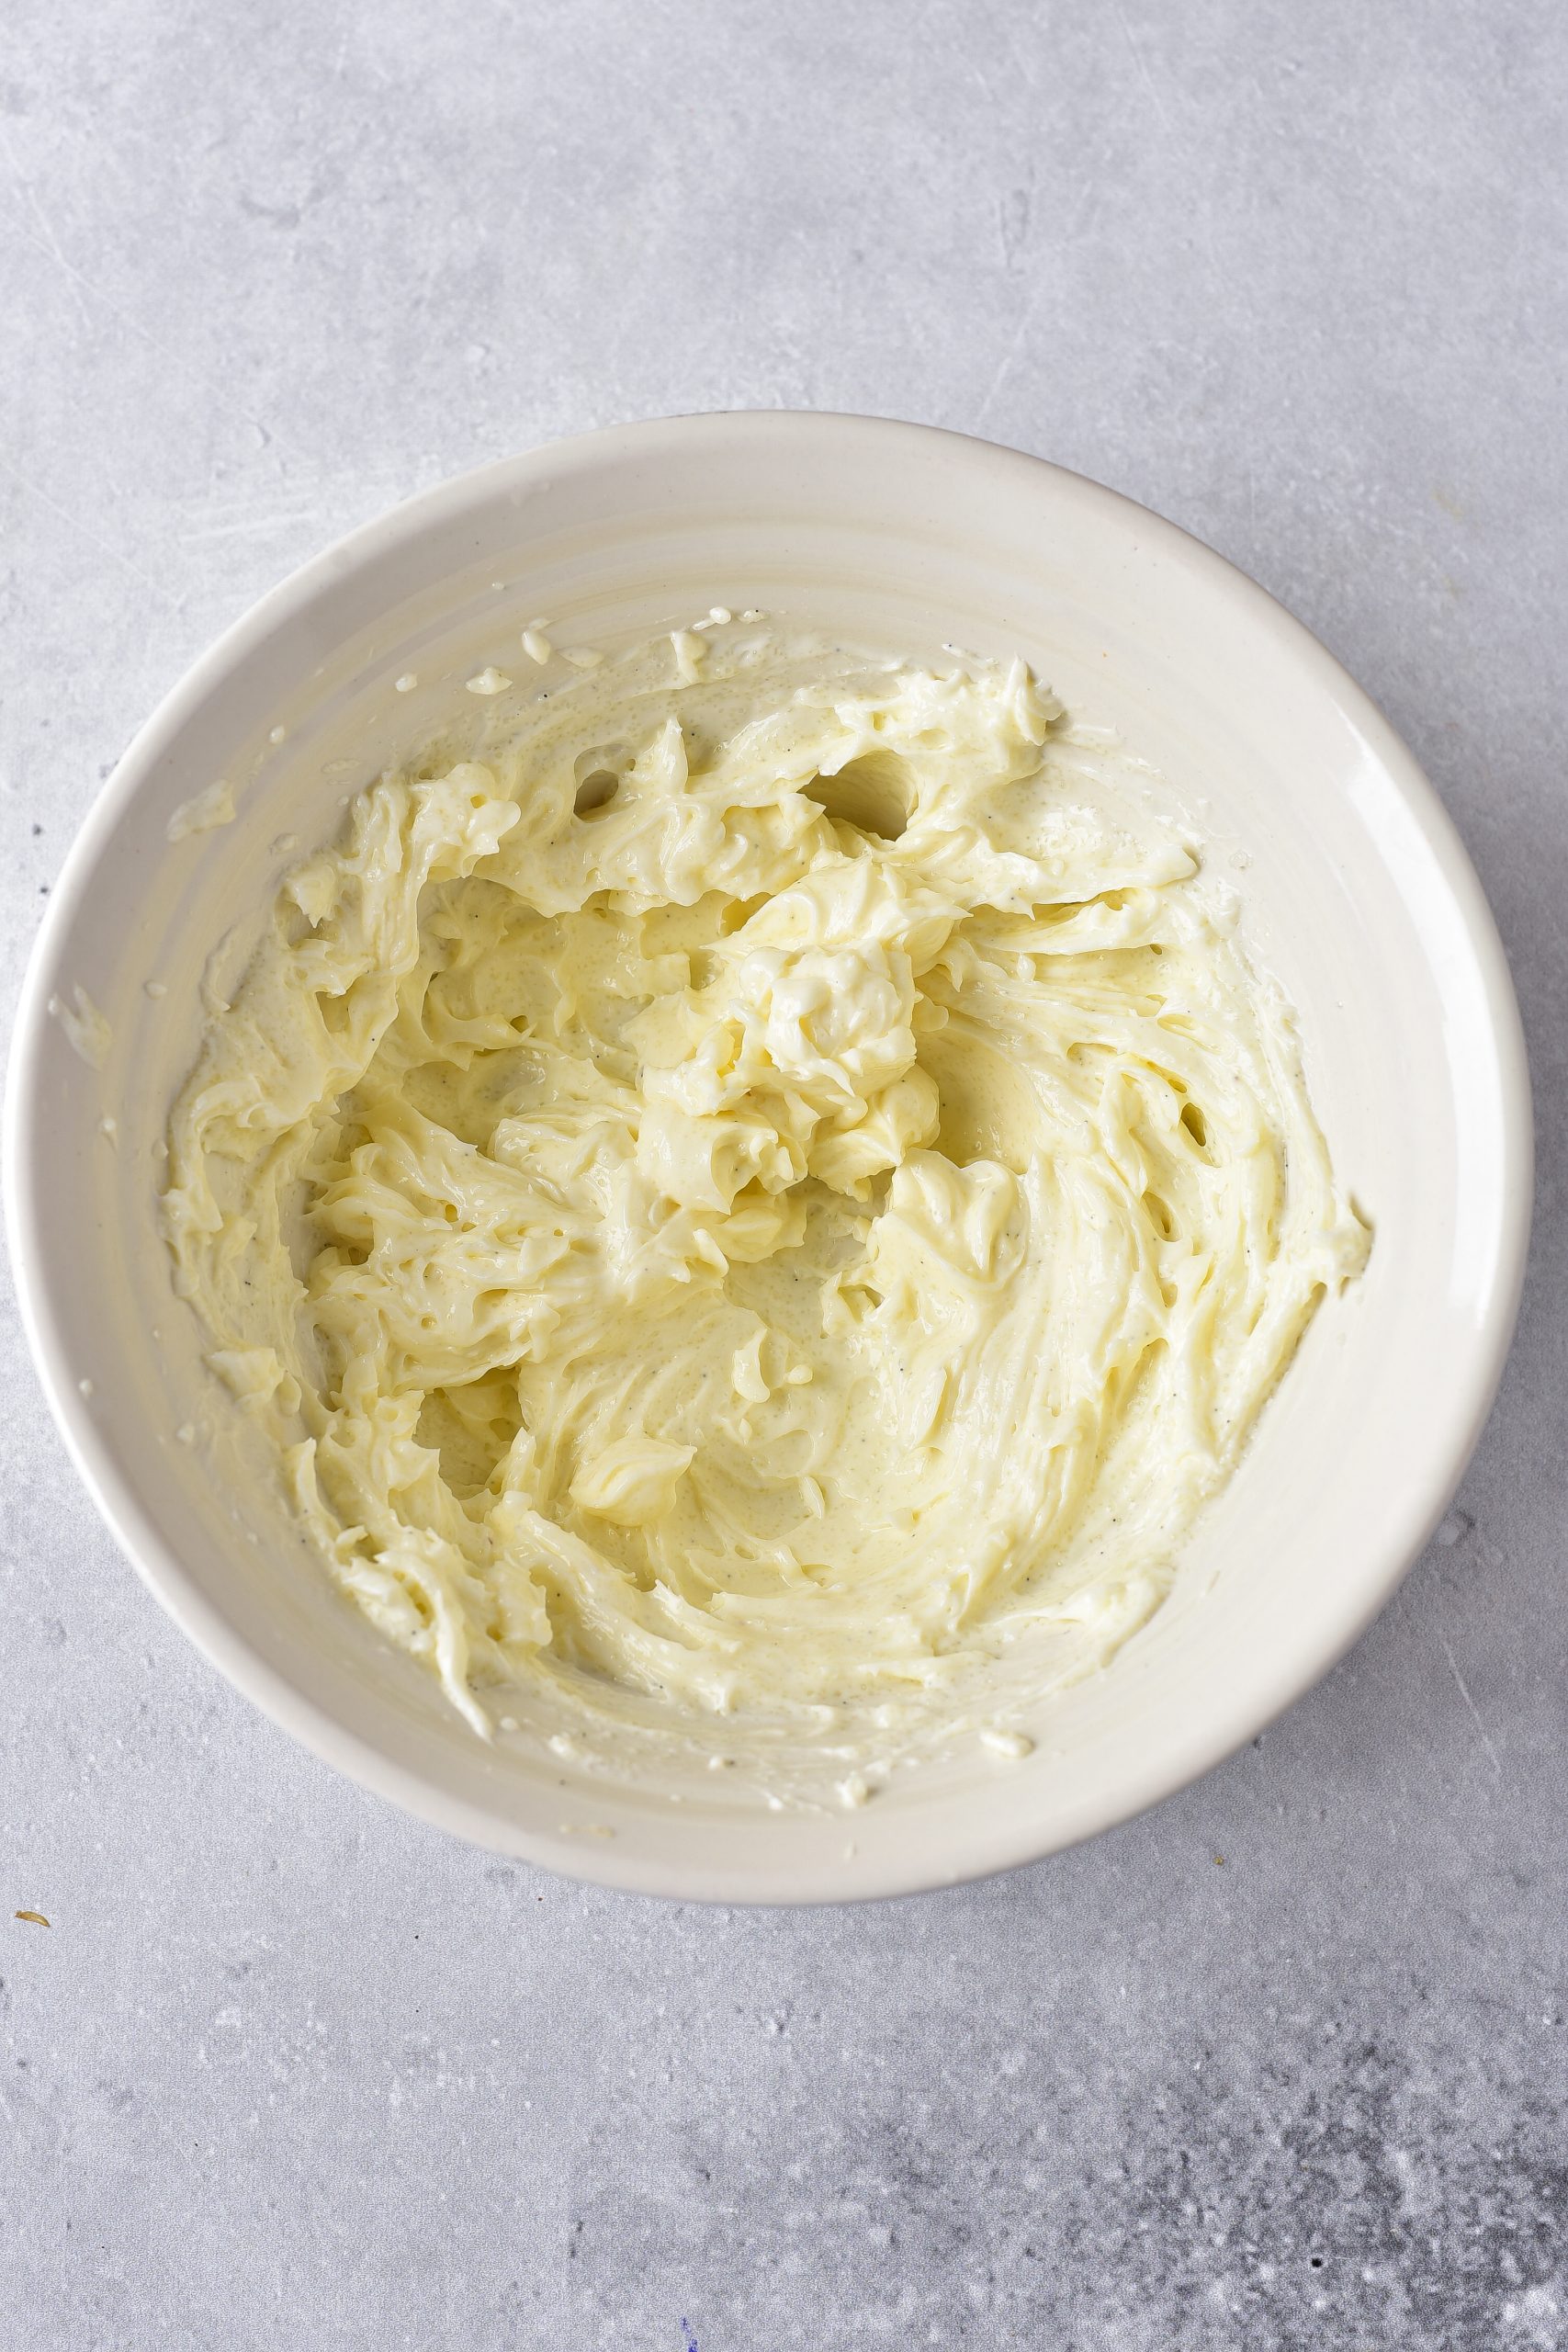 In a mixing bowl, combine the cream cheese, vanilla, and sugar until smooth and creamy. 